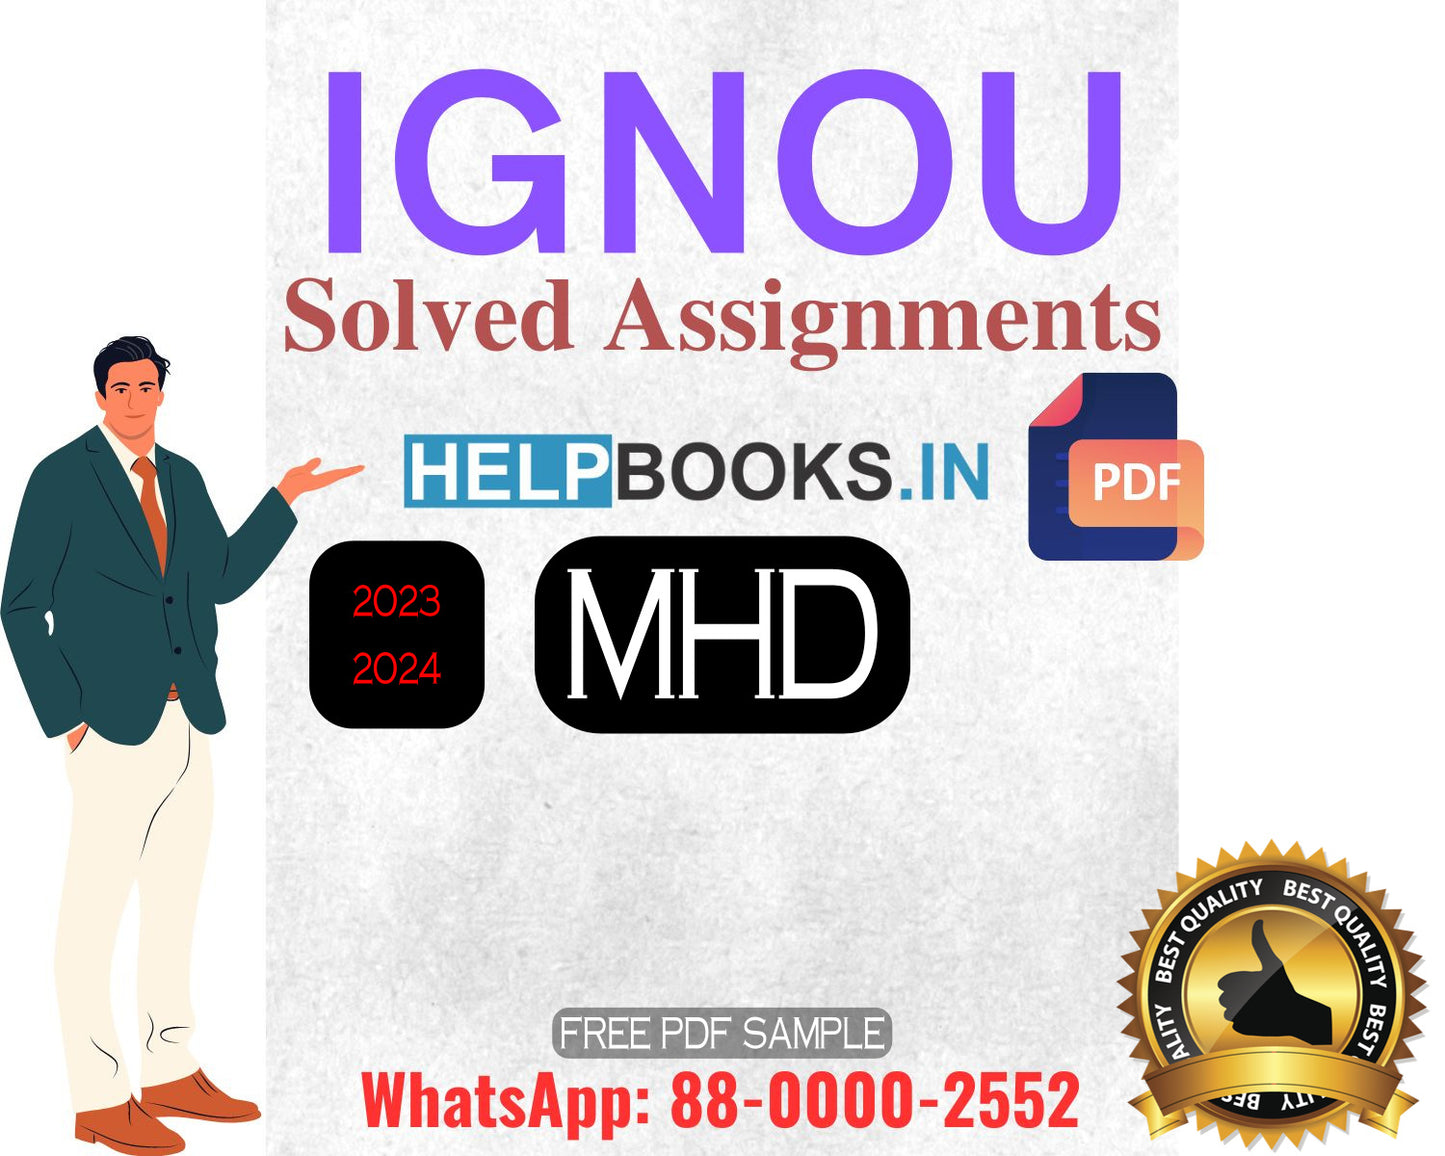 IGNOU Master's Degree Programme Latest IGNOU Solved Assignment 2023-24 : MHD Master of Arts Hindi Solved Assignments